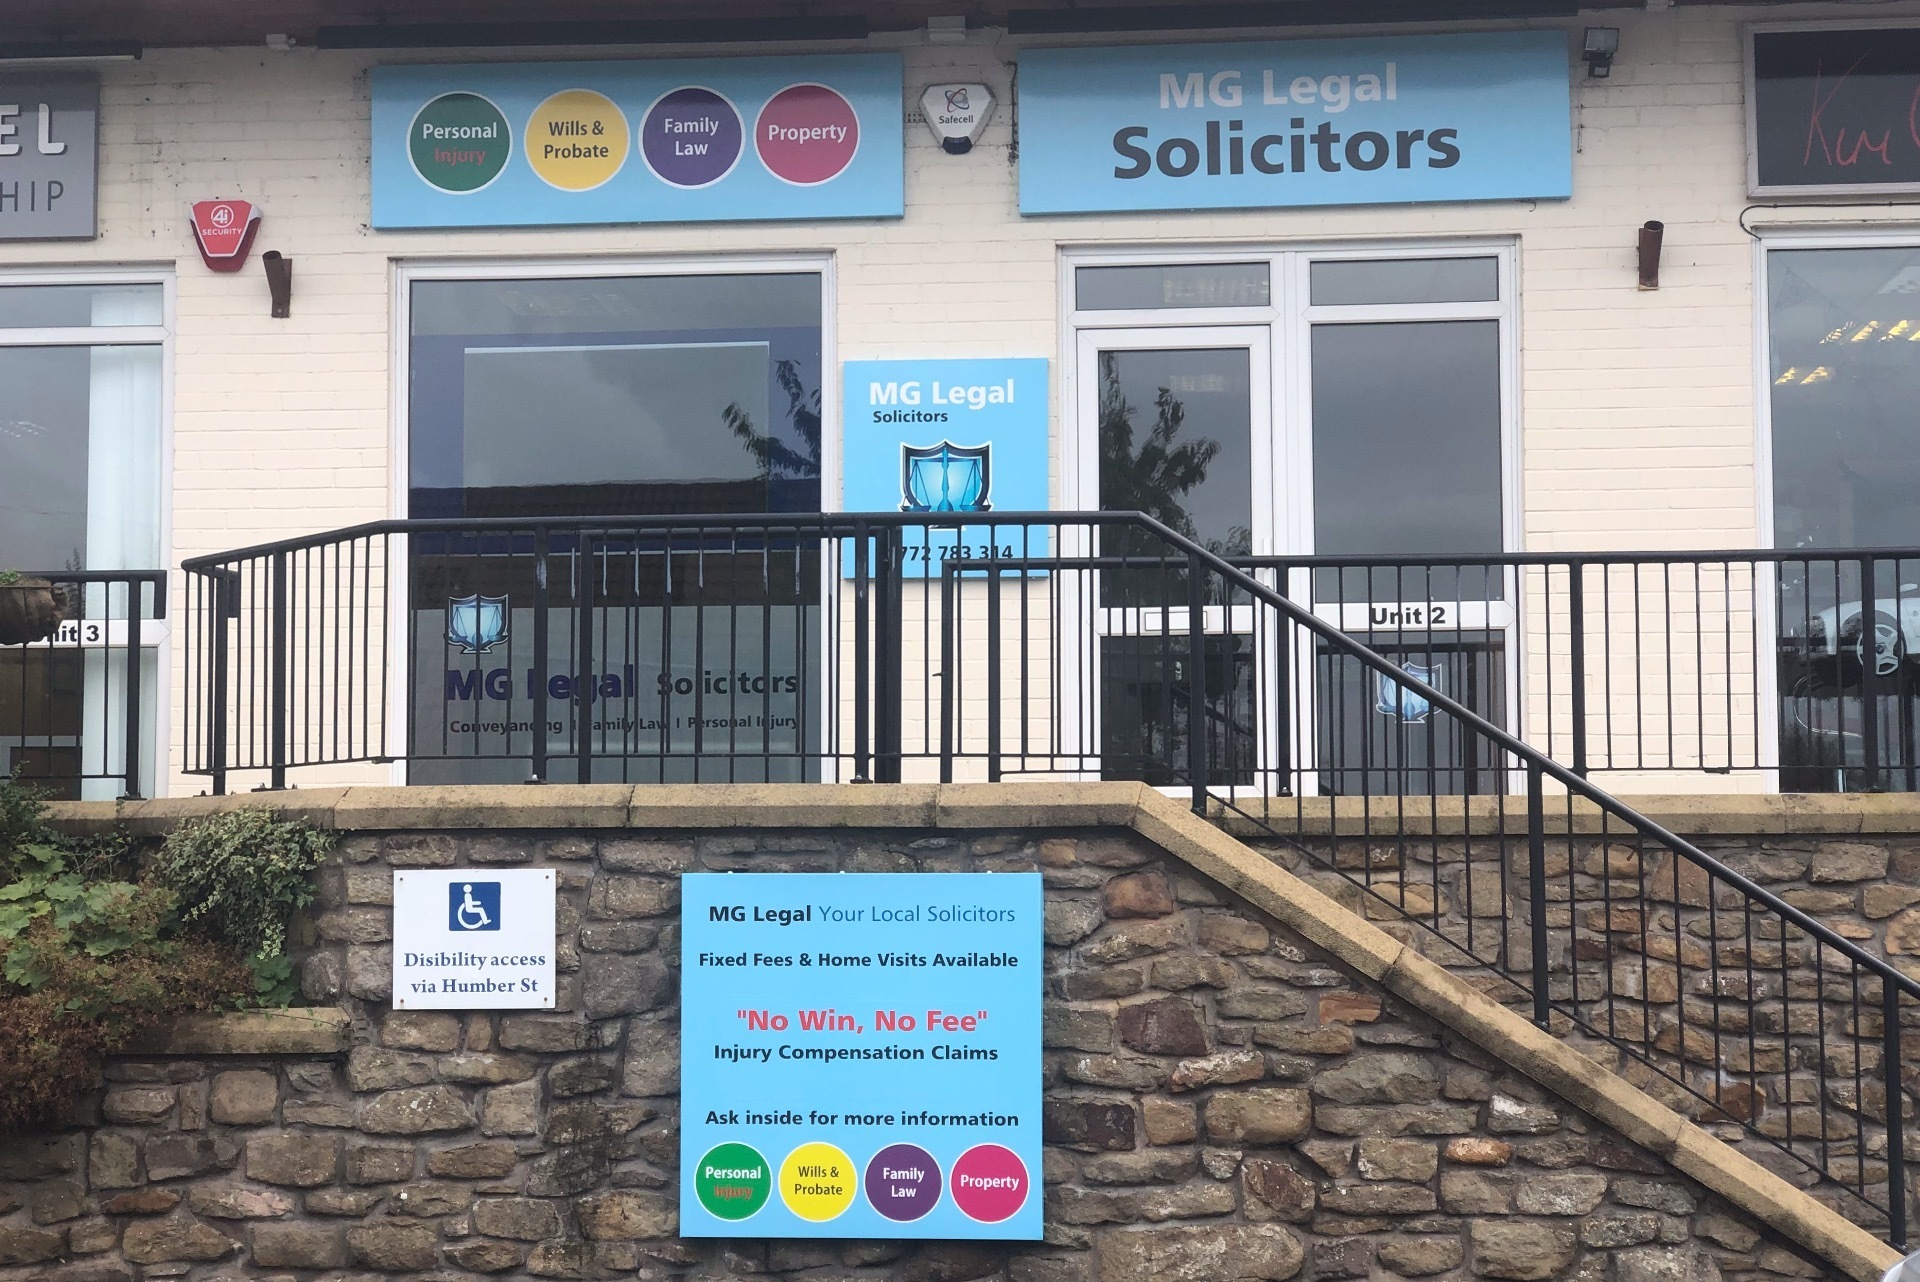 MG Legal's Solicitors in Longridge's Office.